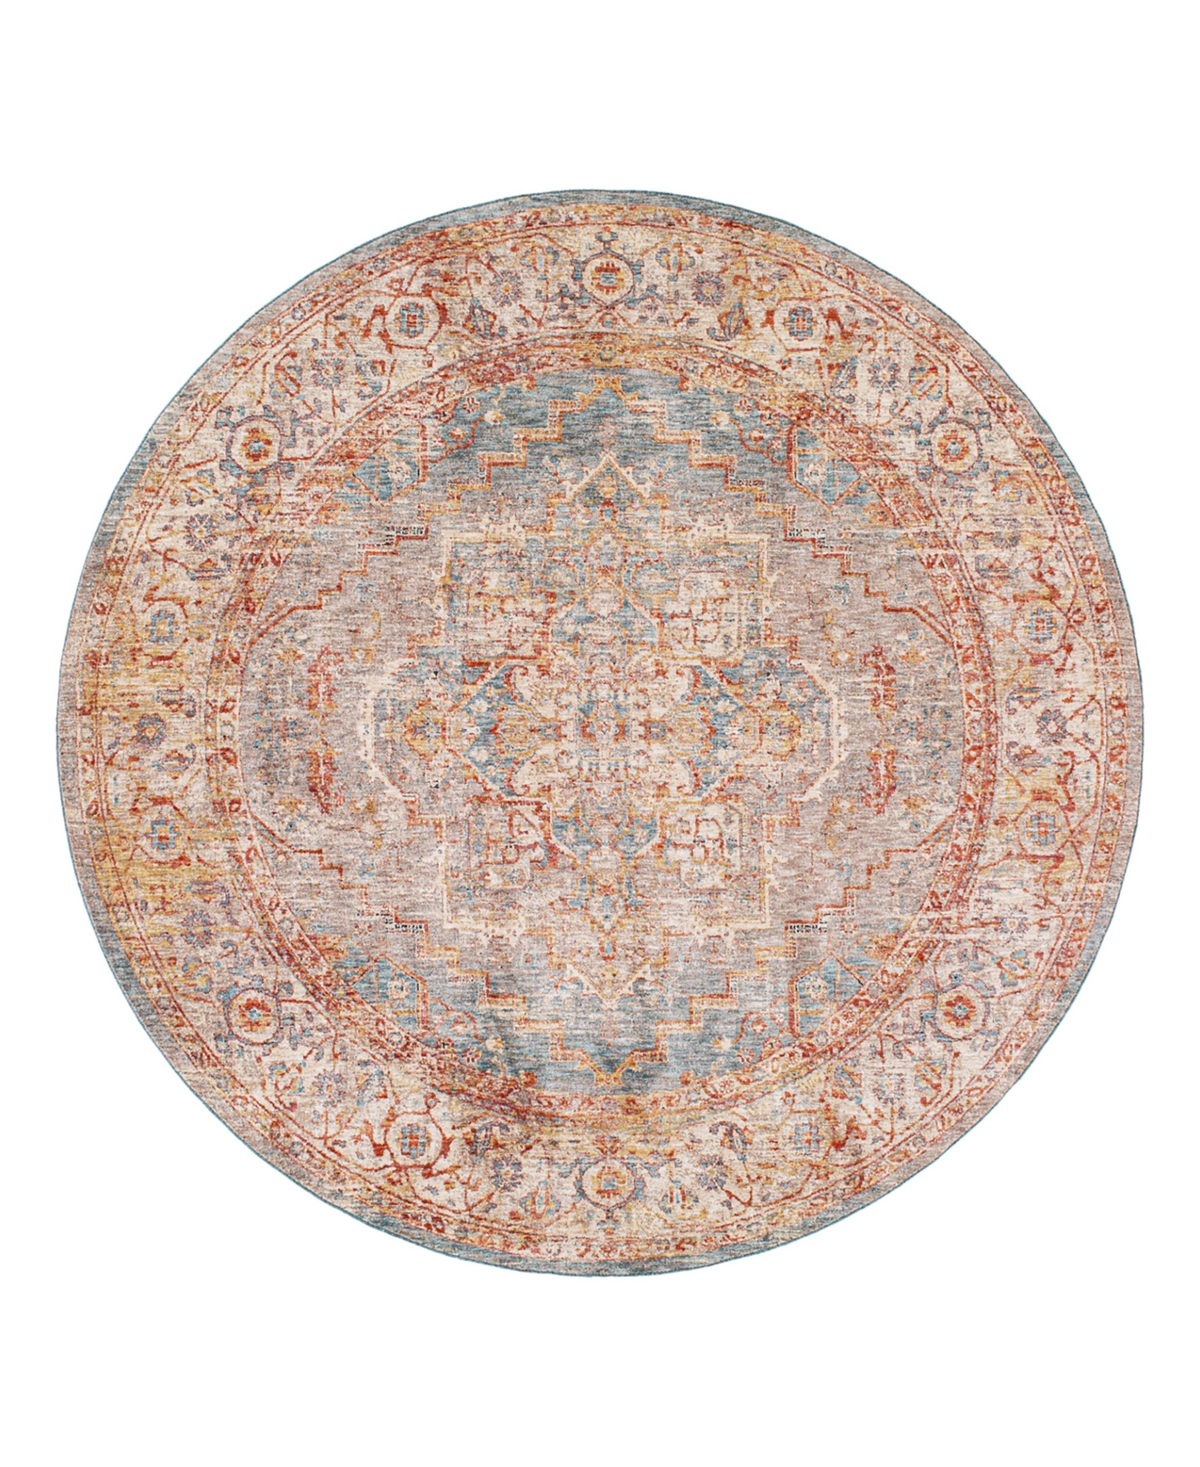 Surya Mirabel Mbe-2310 7'10in x 7'10in Round Area Rug - Mist, Red